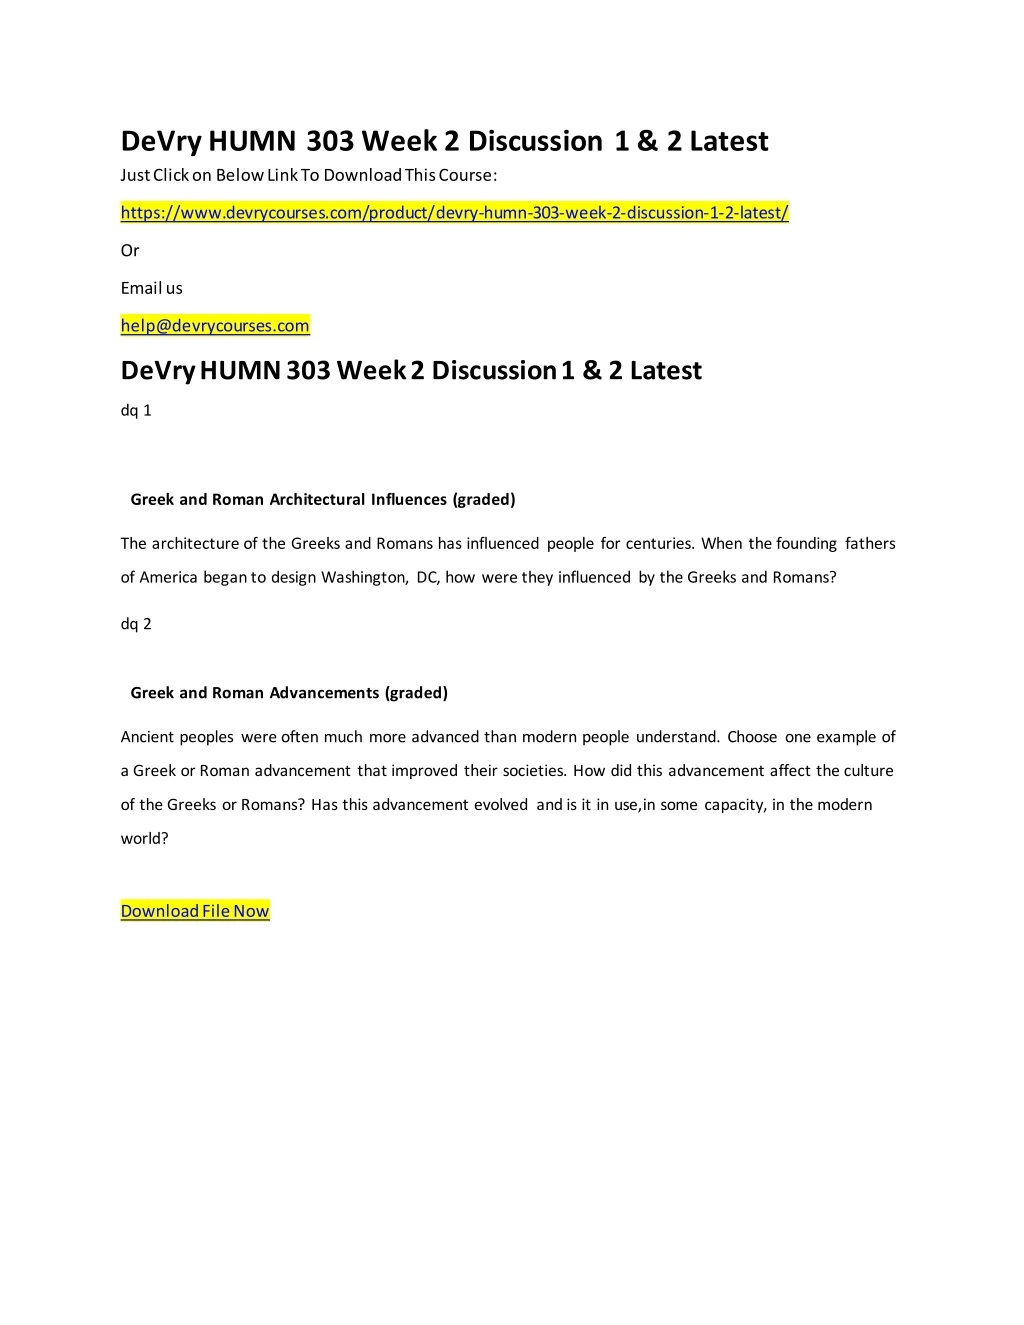 devry humn 303 week 2 discussion 1 2 latest just